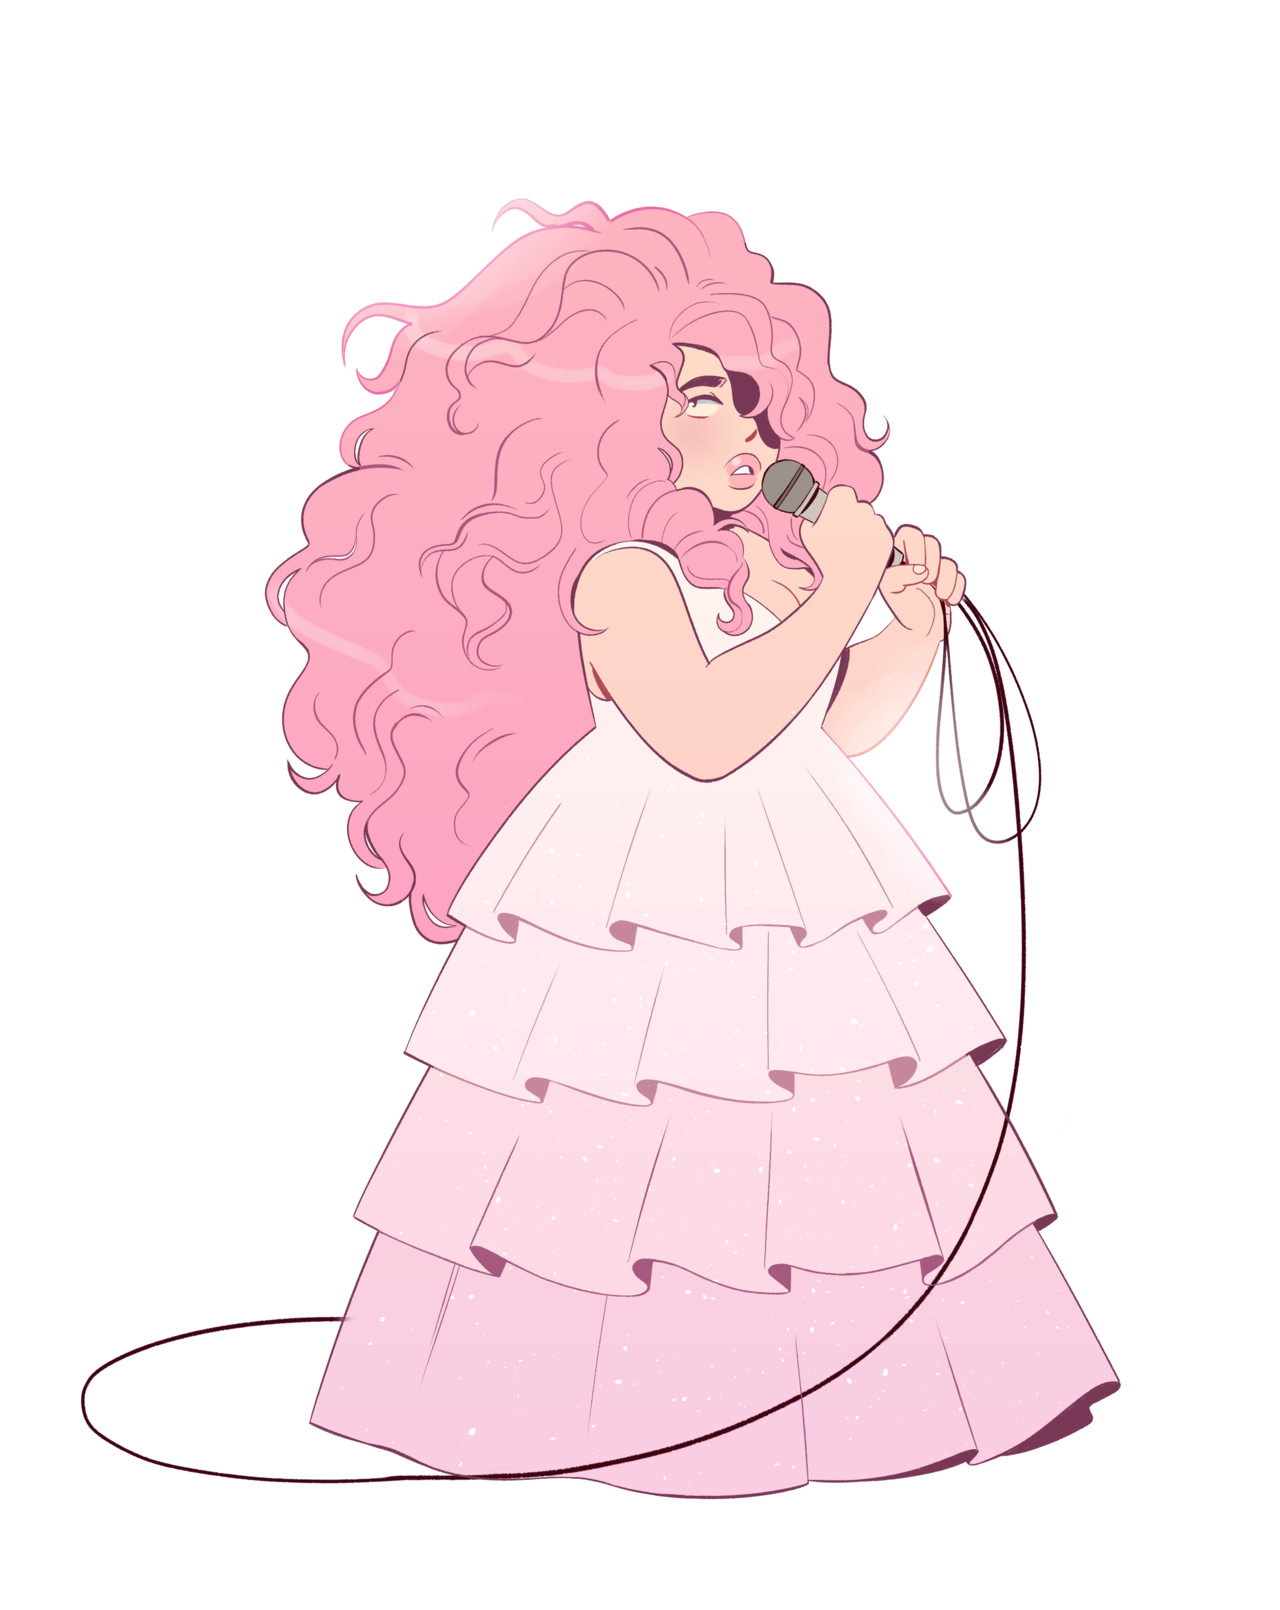 We had to draw an SU character for class so of course I chose pink mom